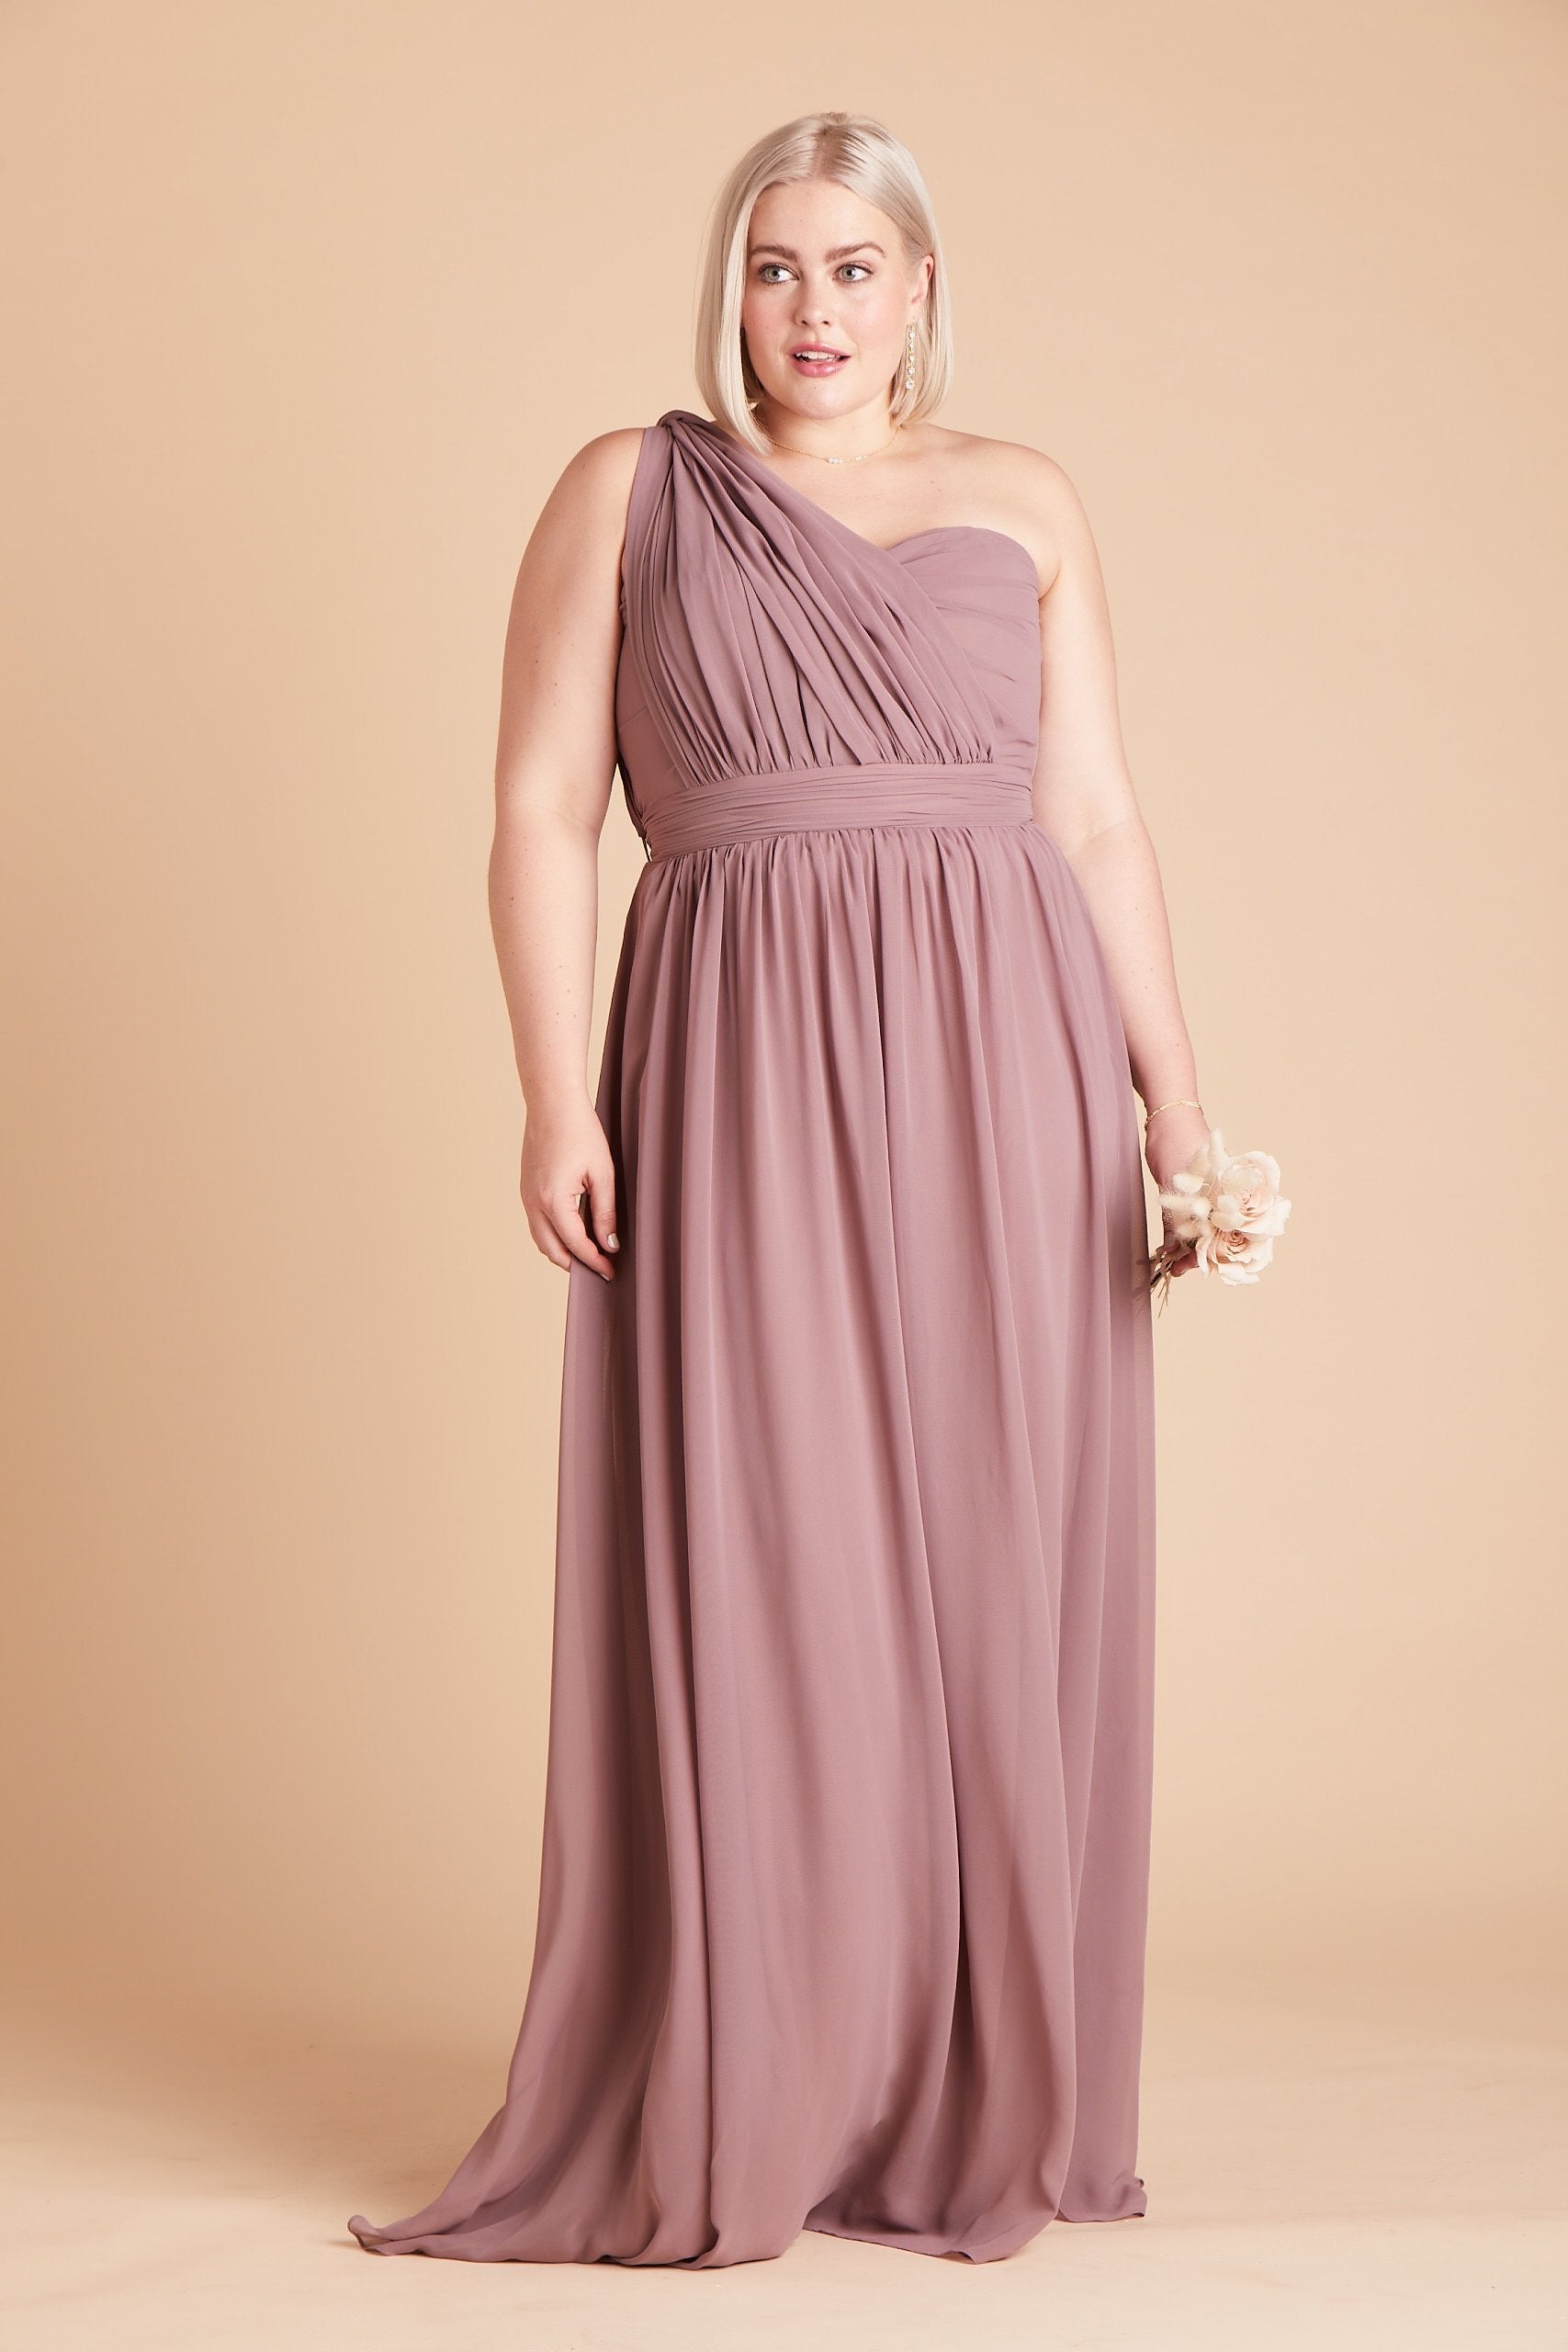 Grace convertible plus size bridesmaid dress in dark mauve chiffon by Birdy Grey, front view